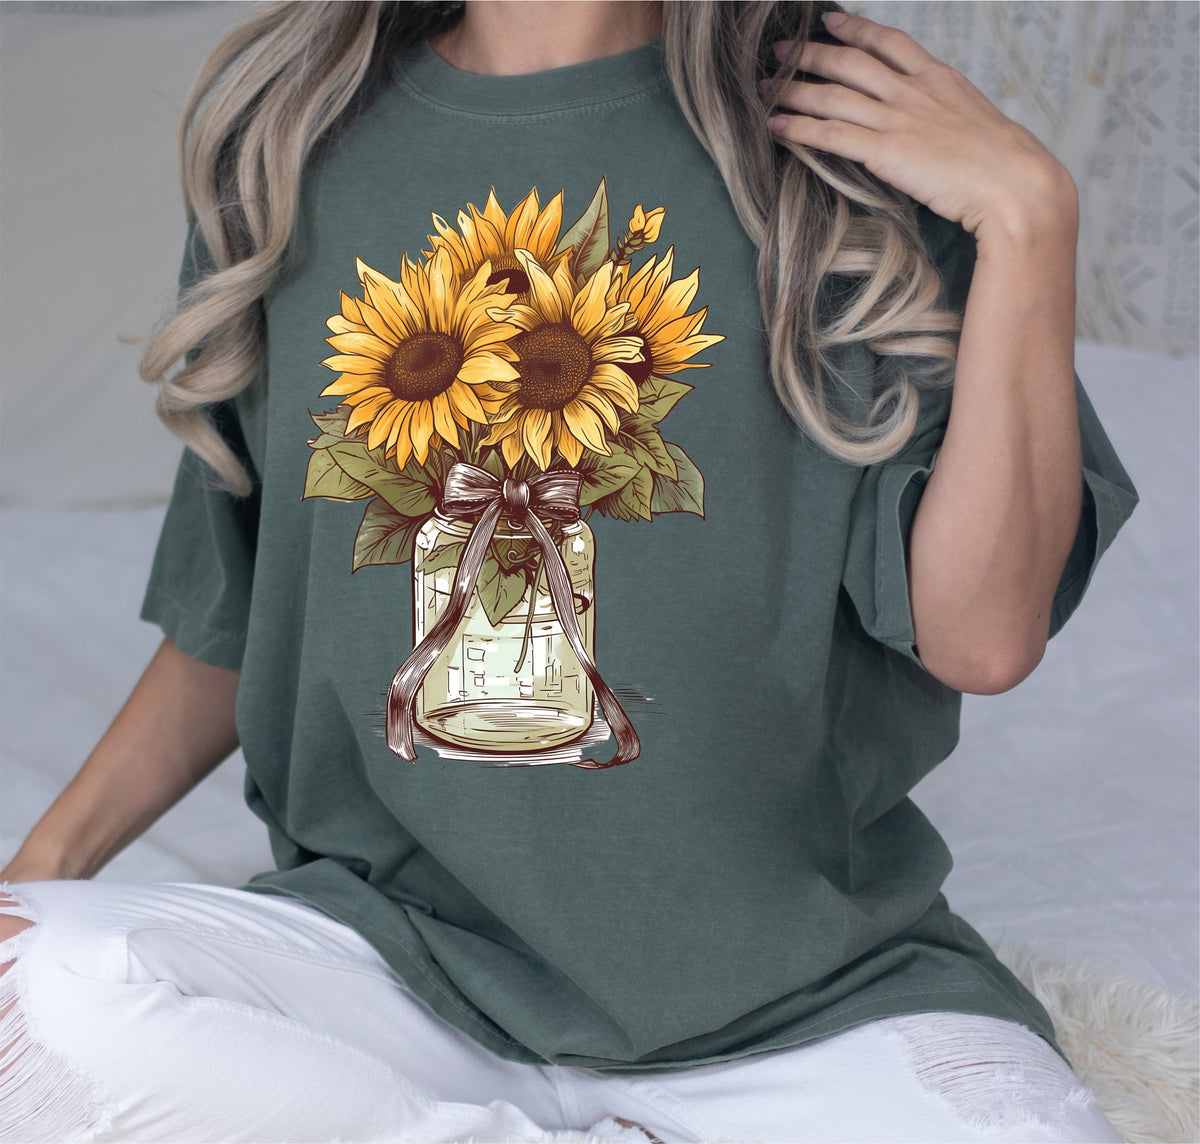 Beige Garment-Dyed T-Shirt by Sunflower on Sale